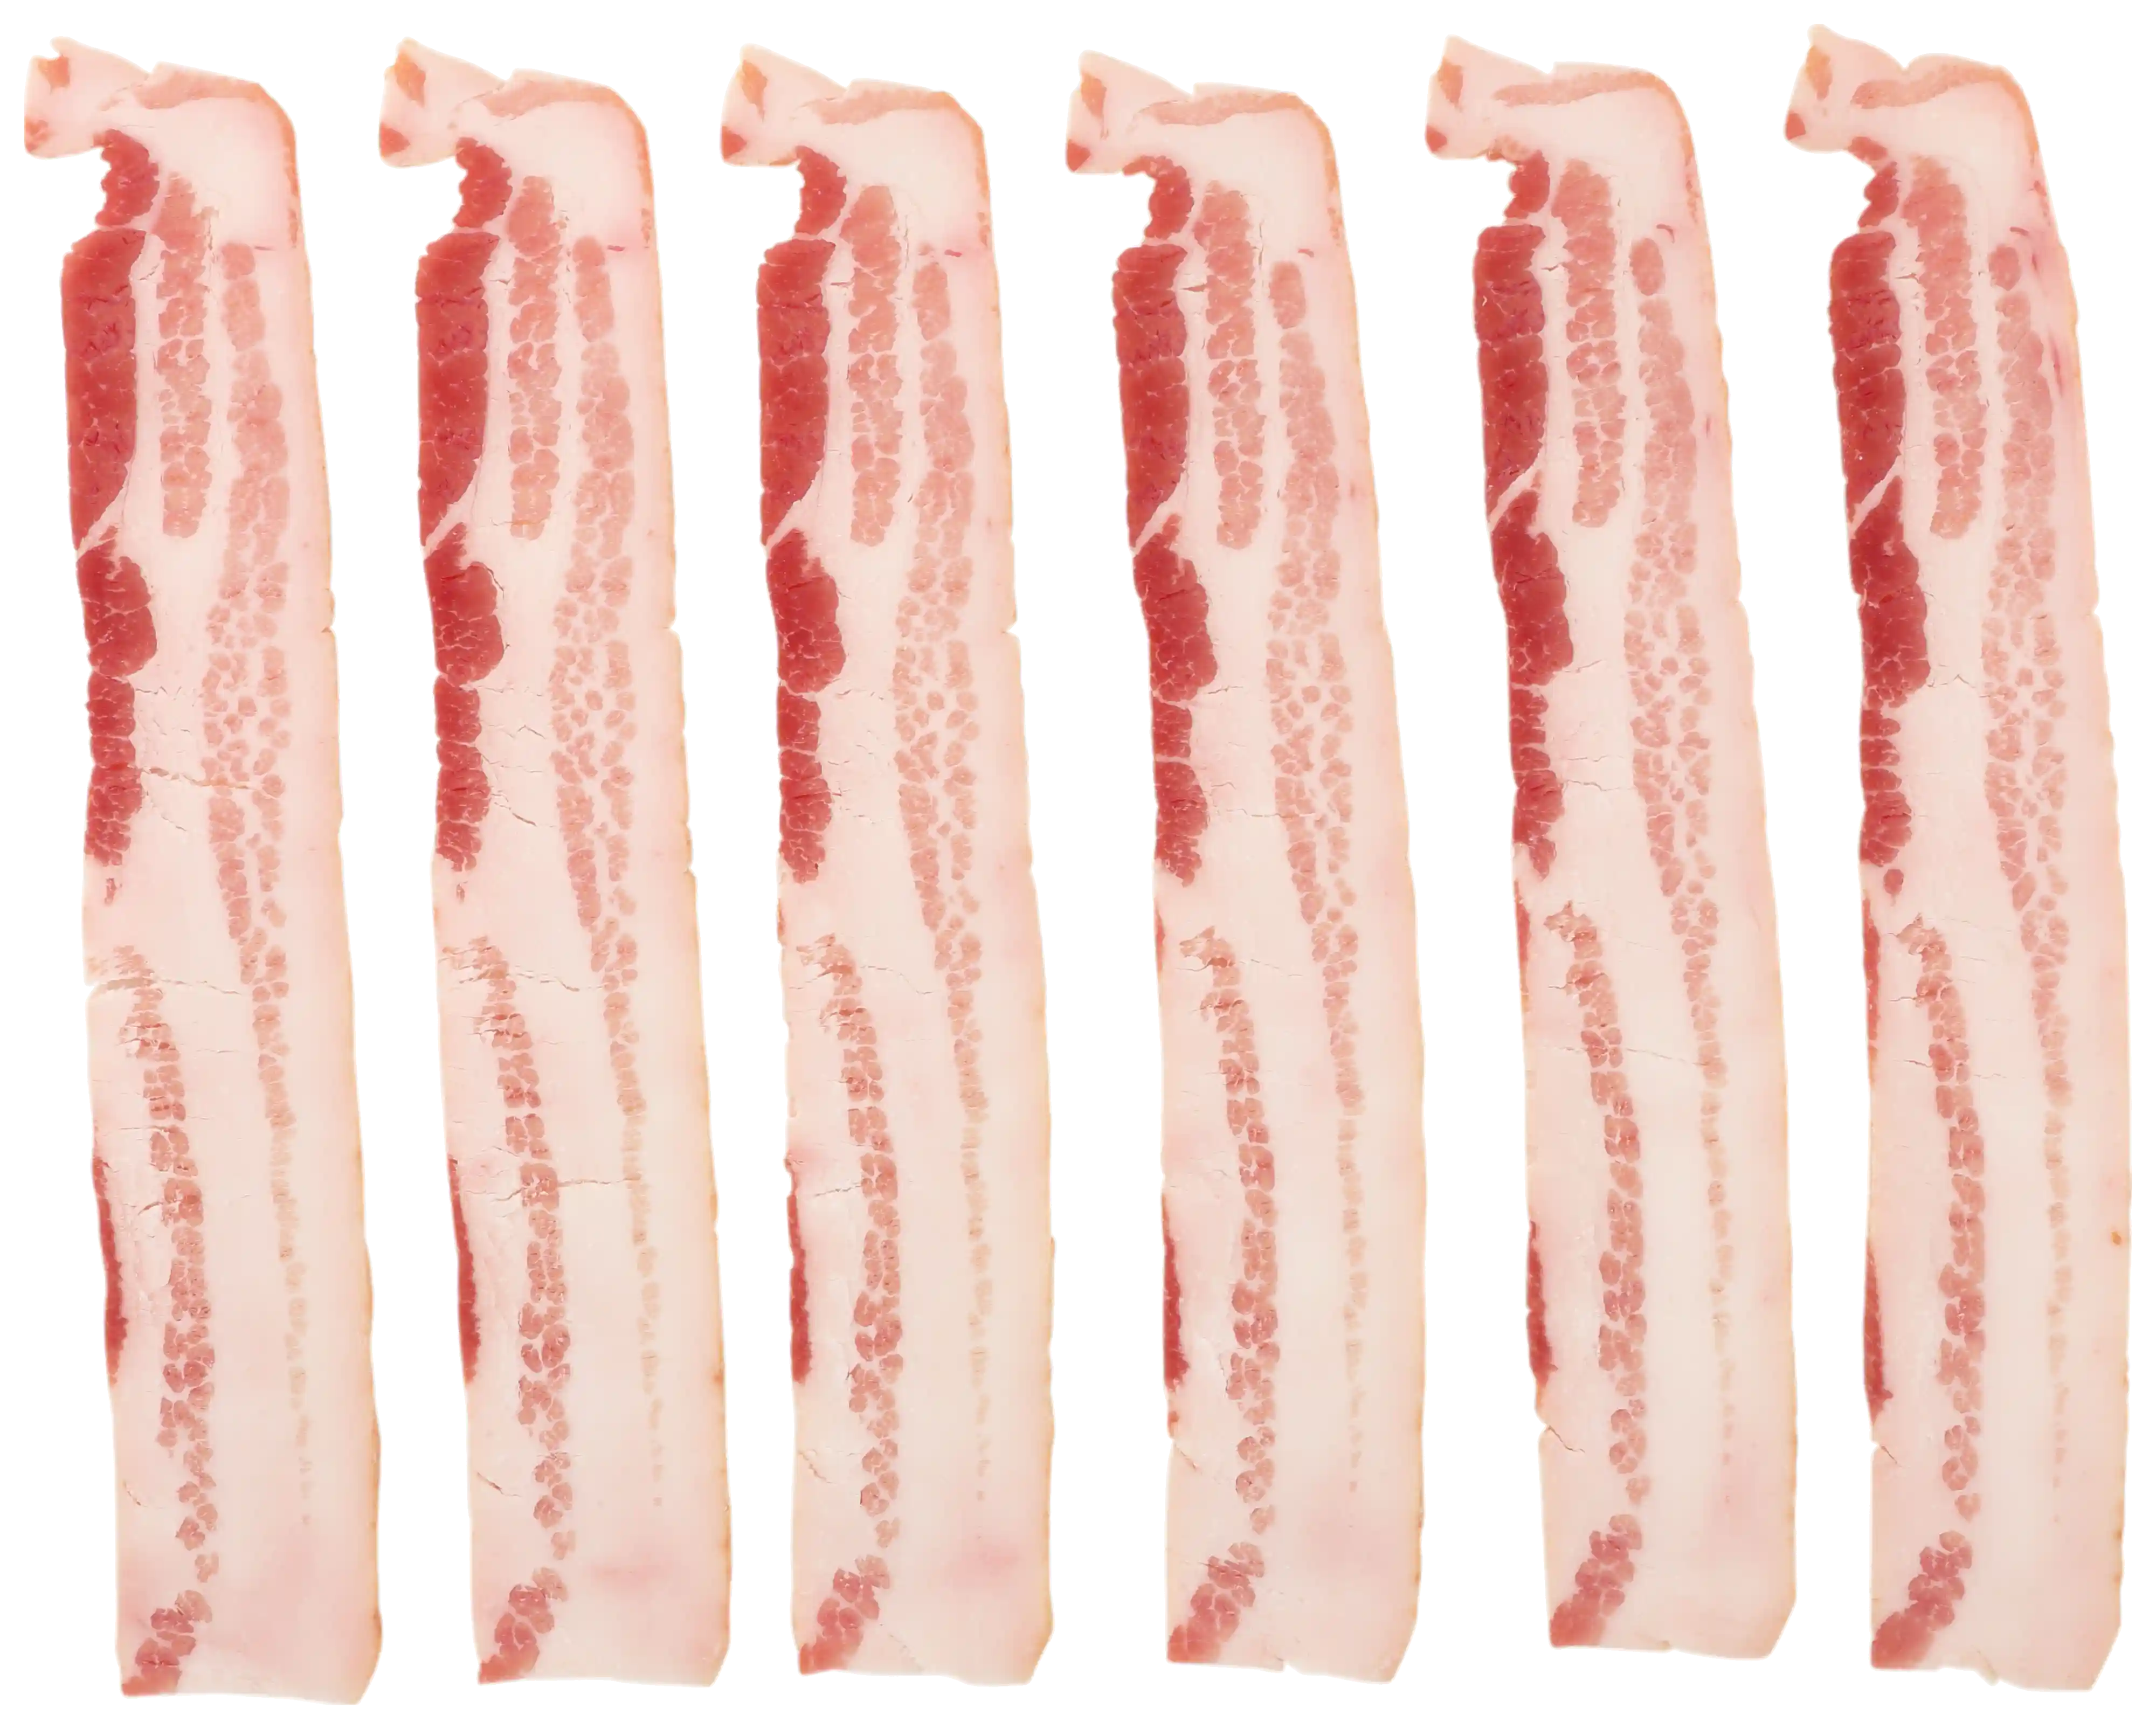 Wright® Brand Naturally Hickory Smoked Thick Sliced Bacon, Bulk, 15 Lbs, 5 Slices/Inch, Frozen_image_21